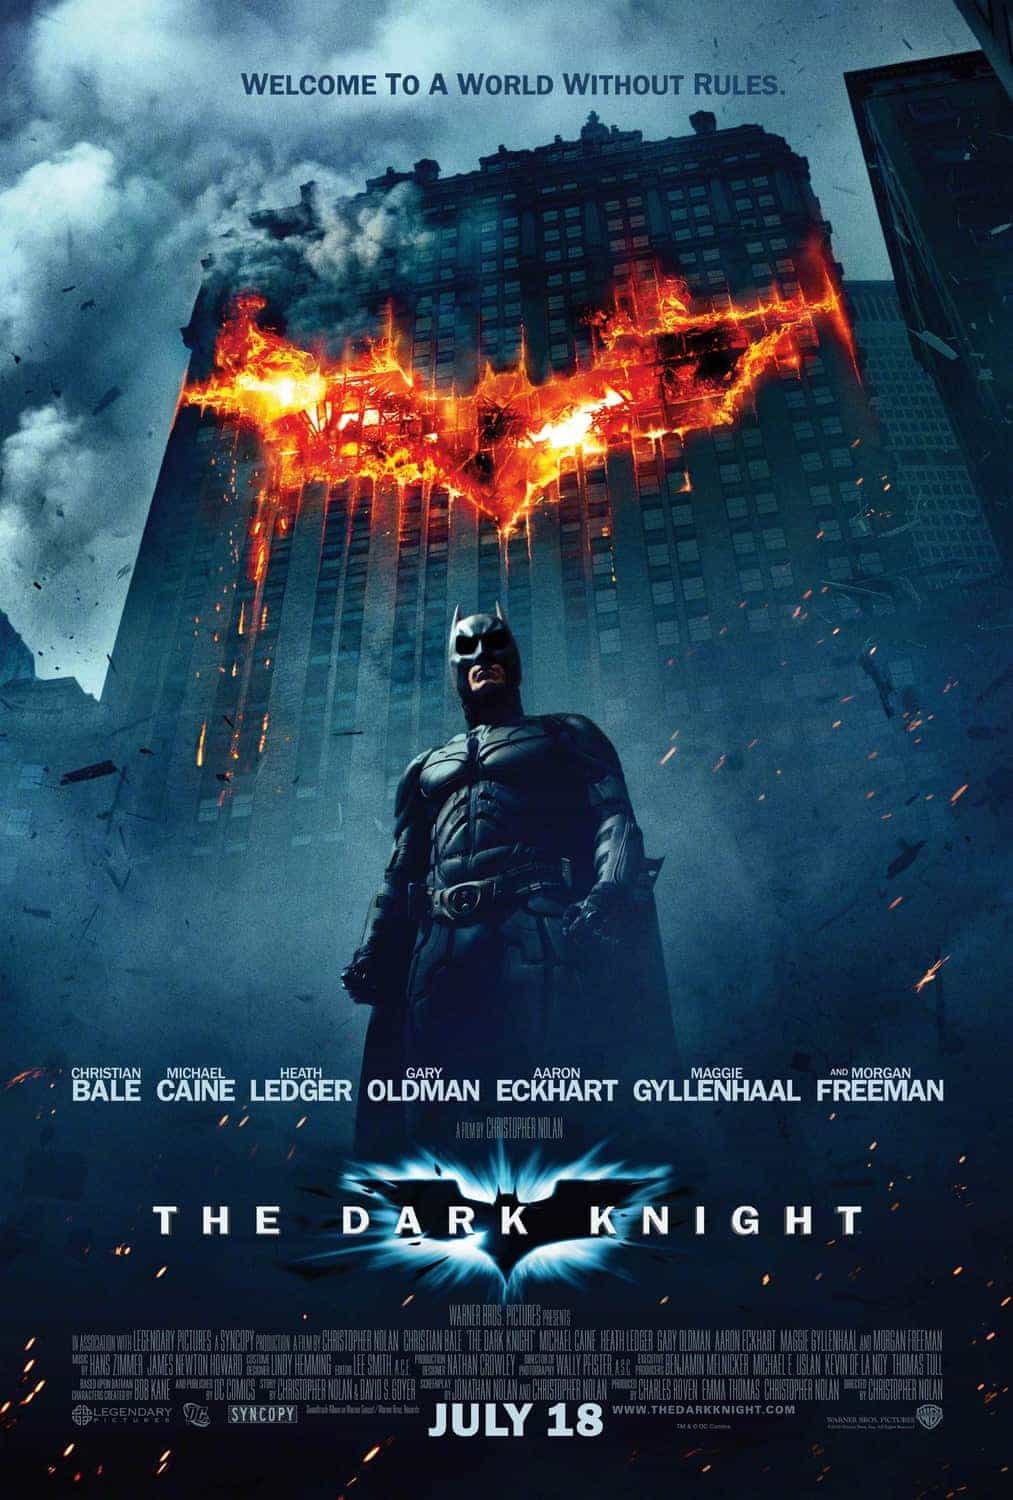 The Dark Knight is the top grossing film of 2008 worldwide
